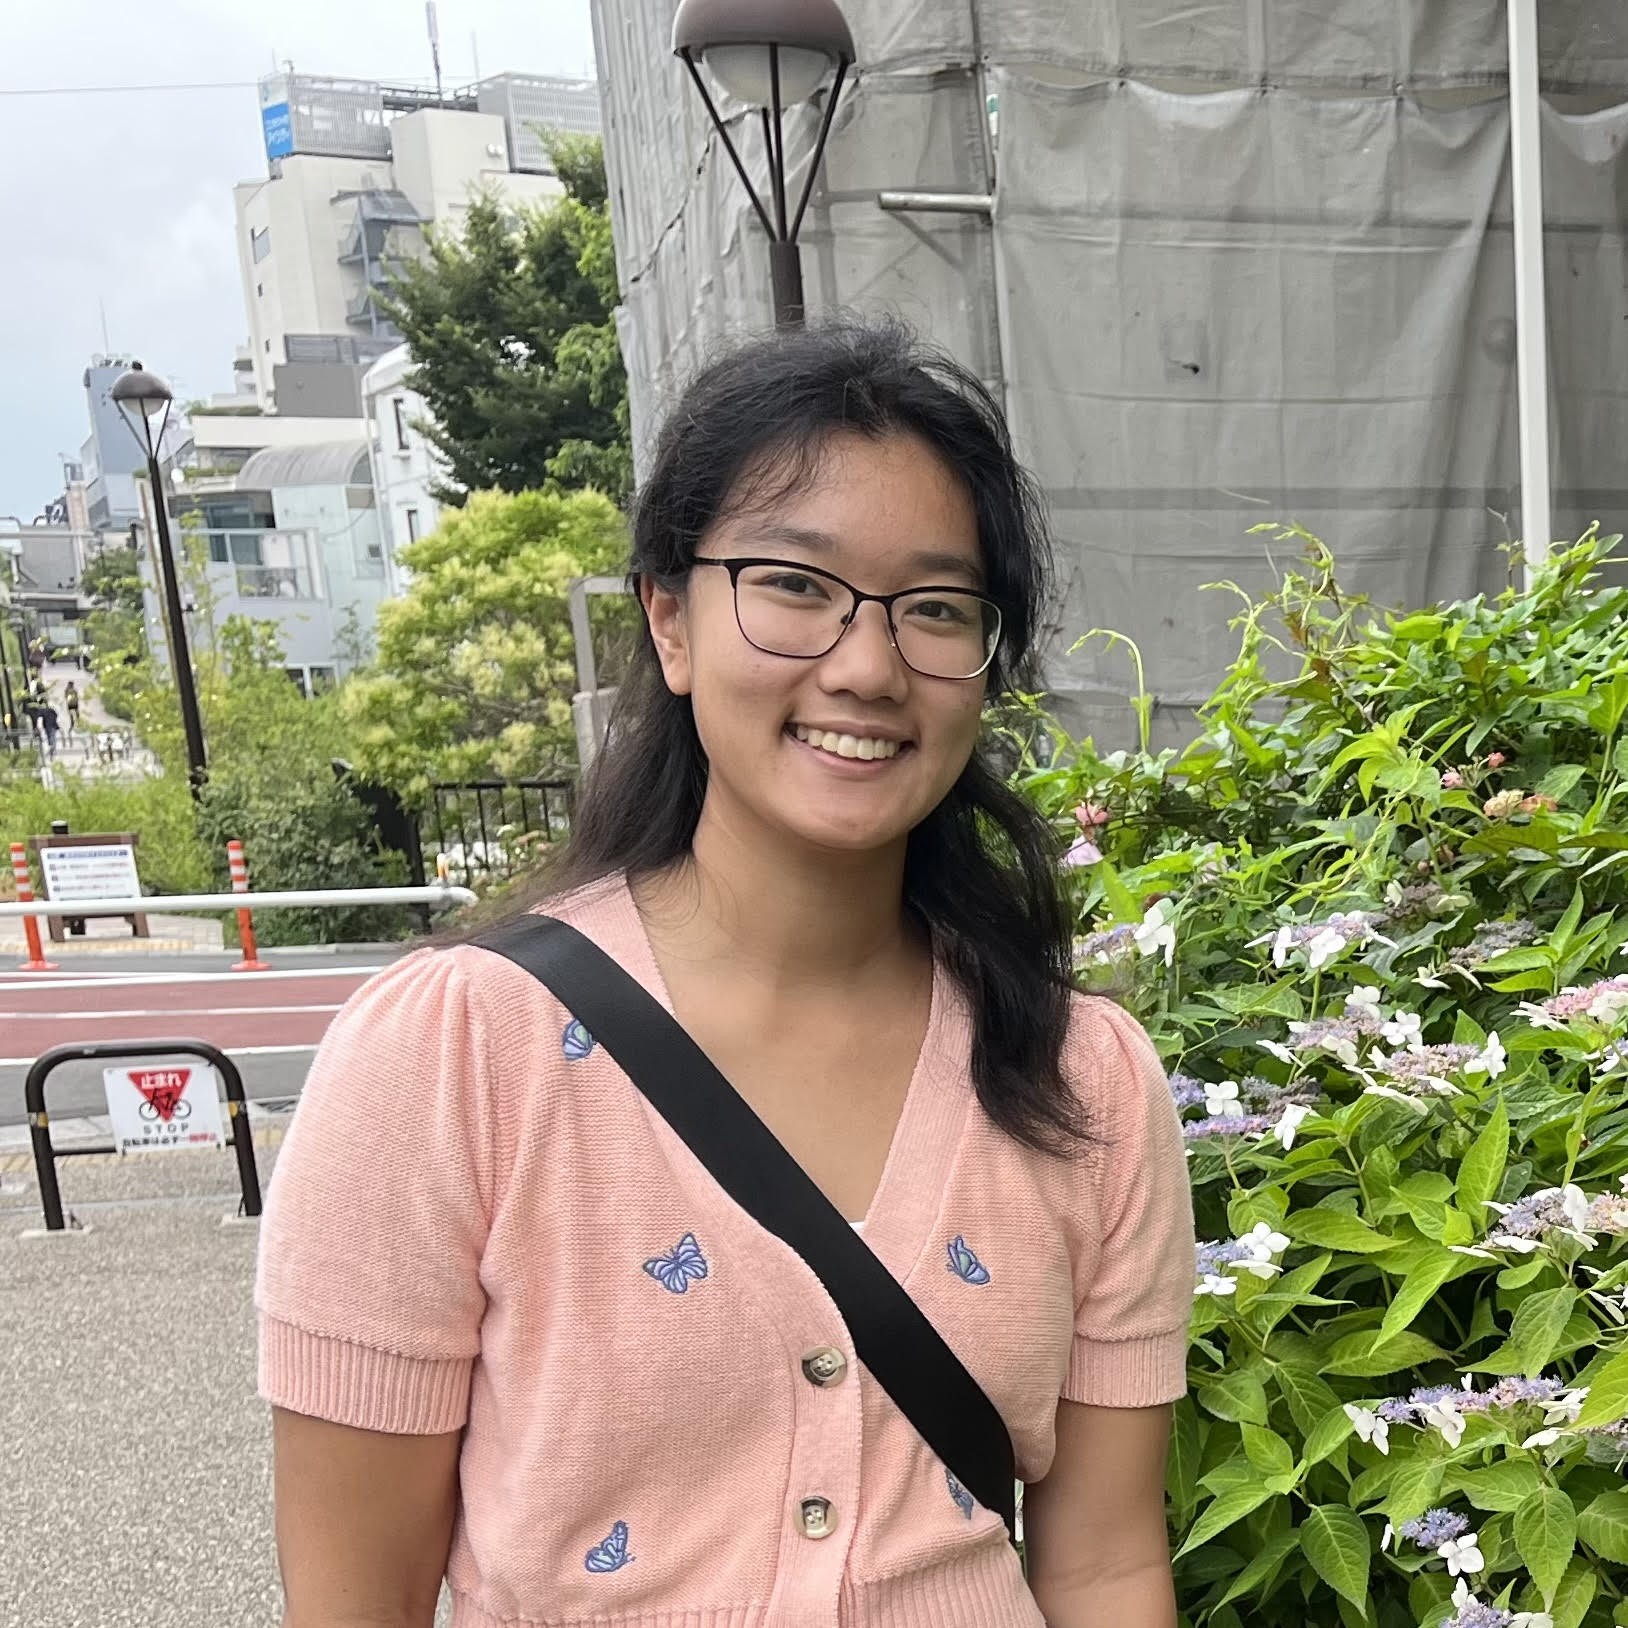 Gaby Chu is a freshman studying Biology. She is on the botany team for Green Wall and helps research and test different methods of growing plants in a self sustainable system. Gaby joined ESW because of her passion for sustainability and love of solving problems regarding the environment.